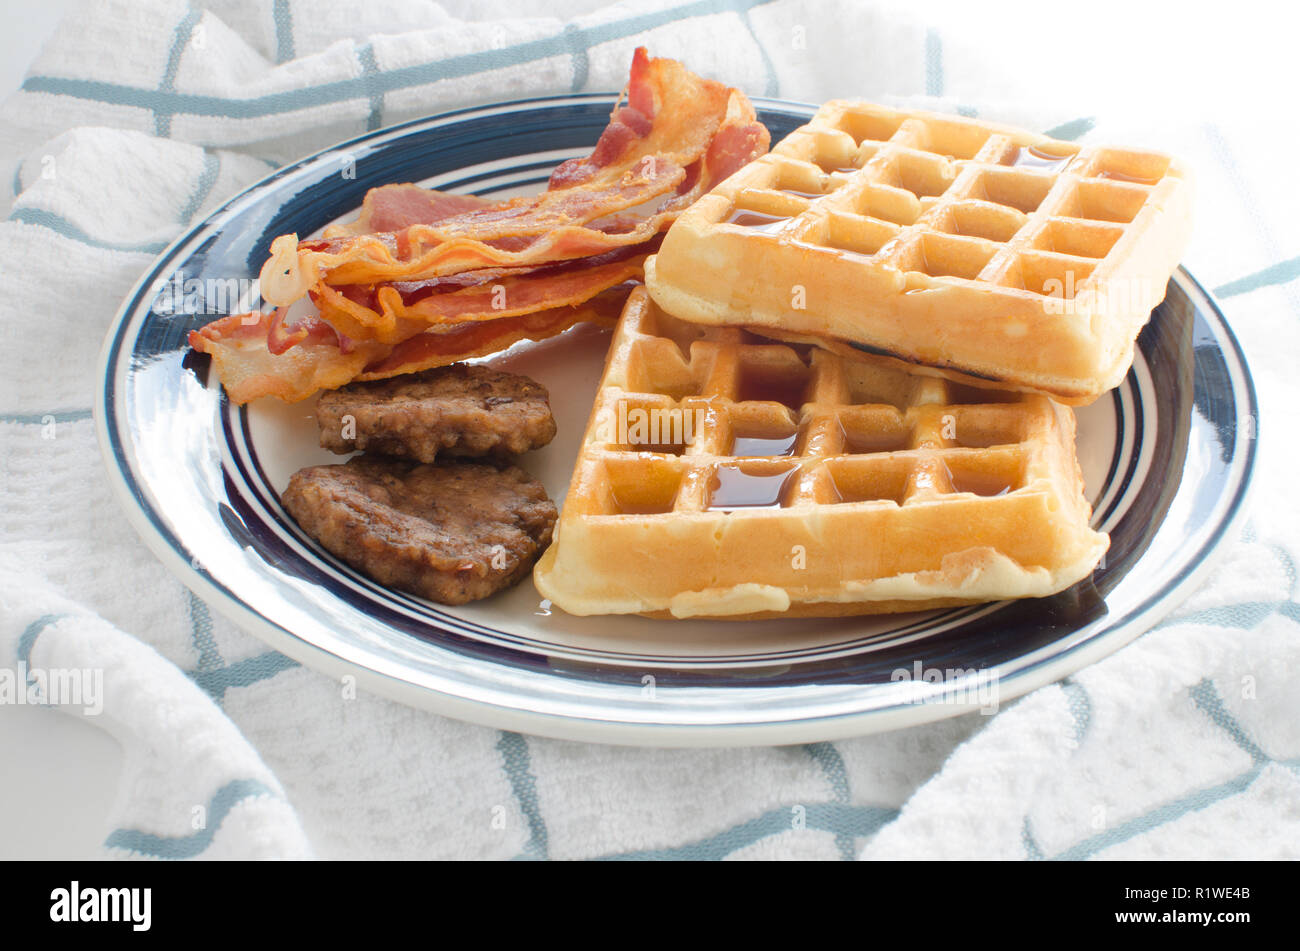 Plate of waffles with maple syrup, bacon strips and sausage patties Stock Photo